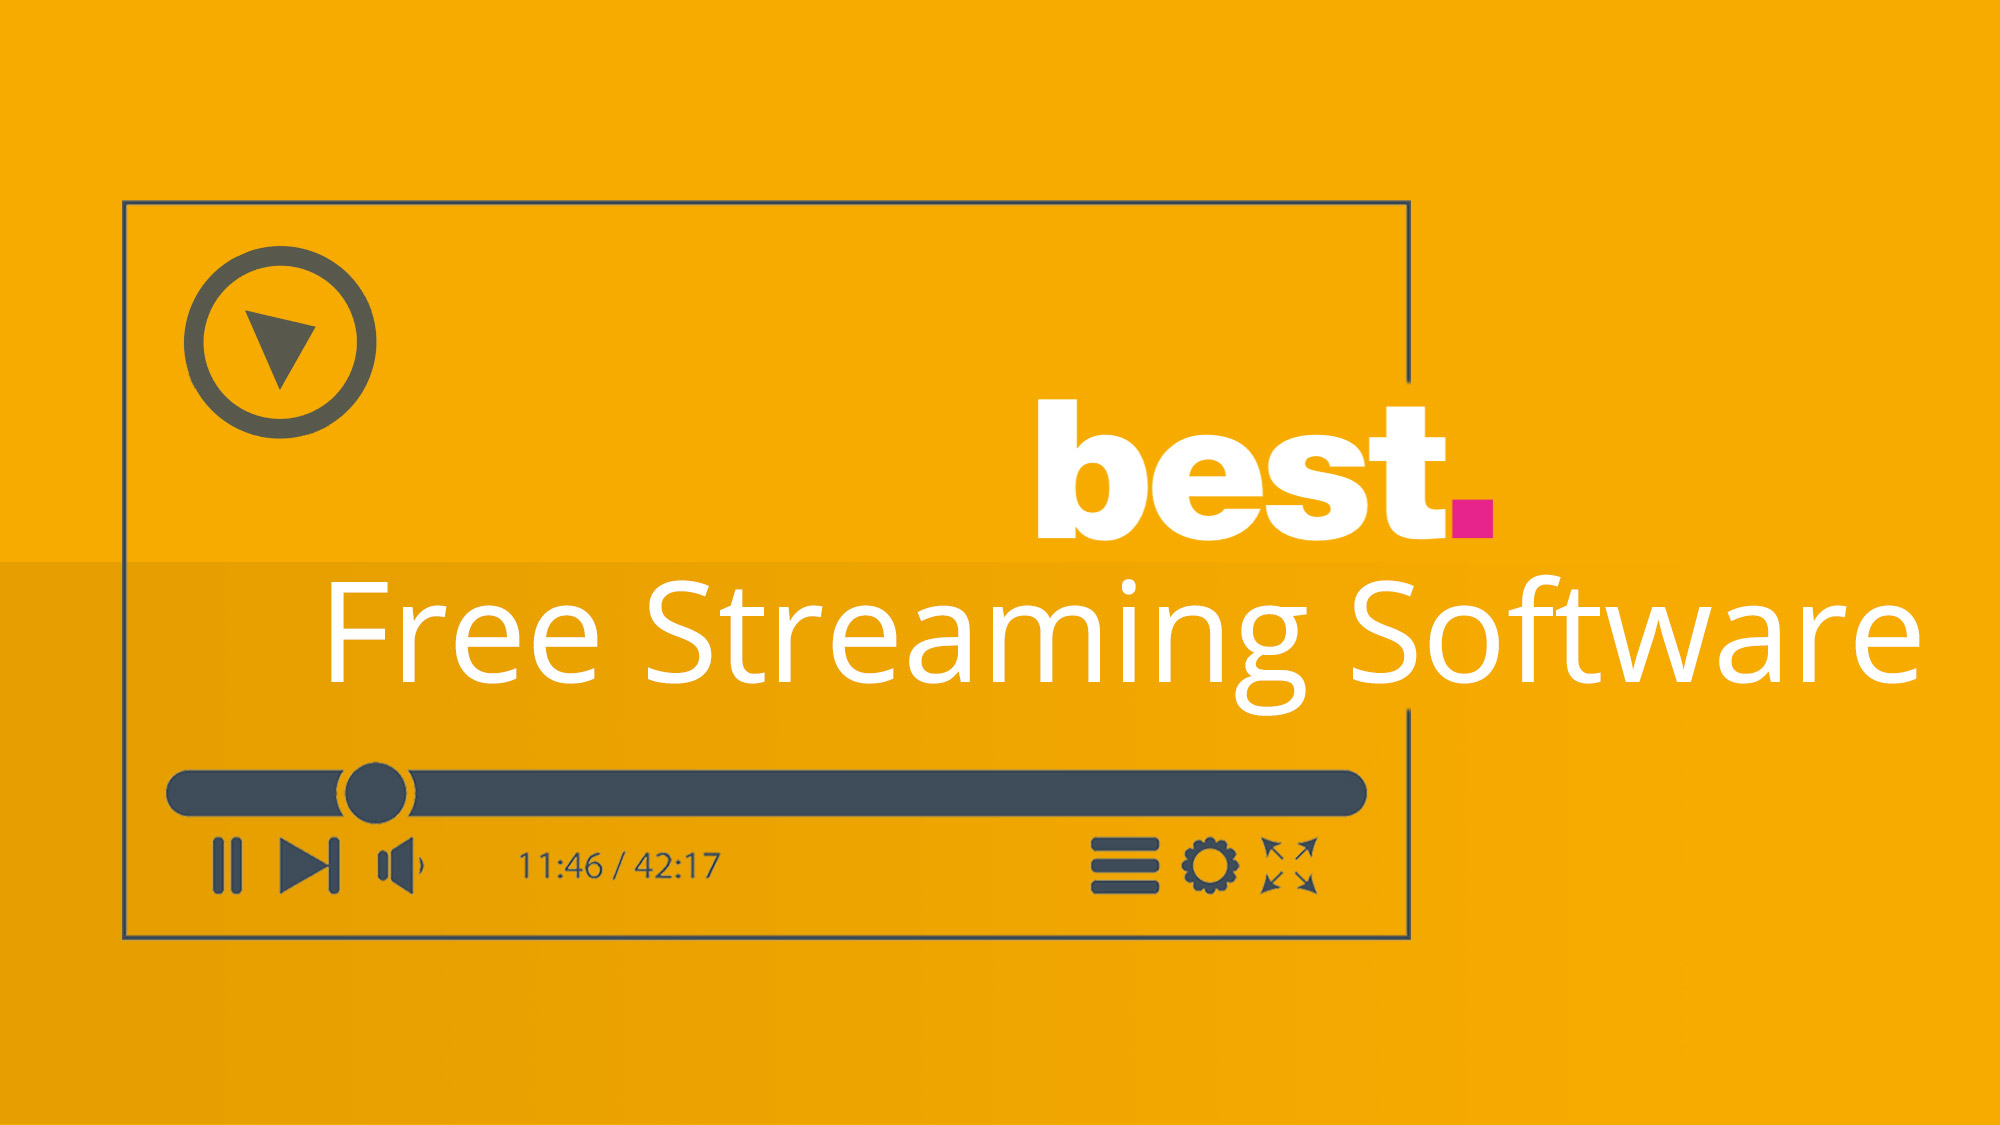 stream receiving software for pc and mac